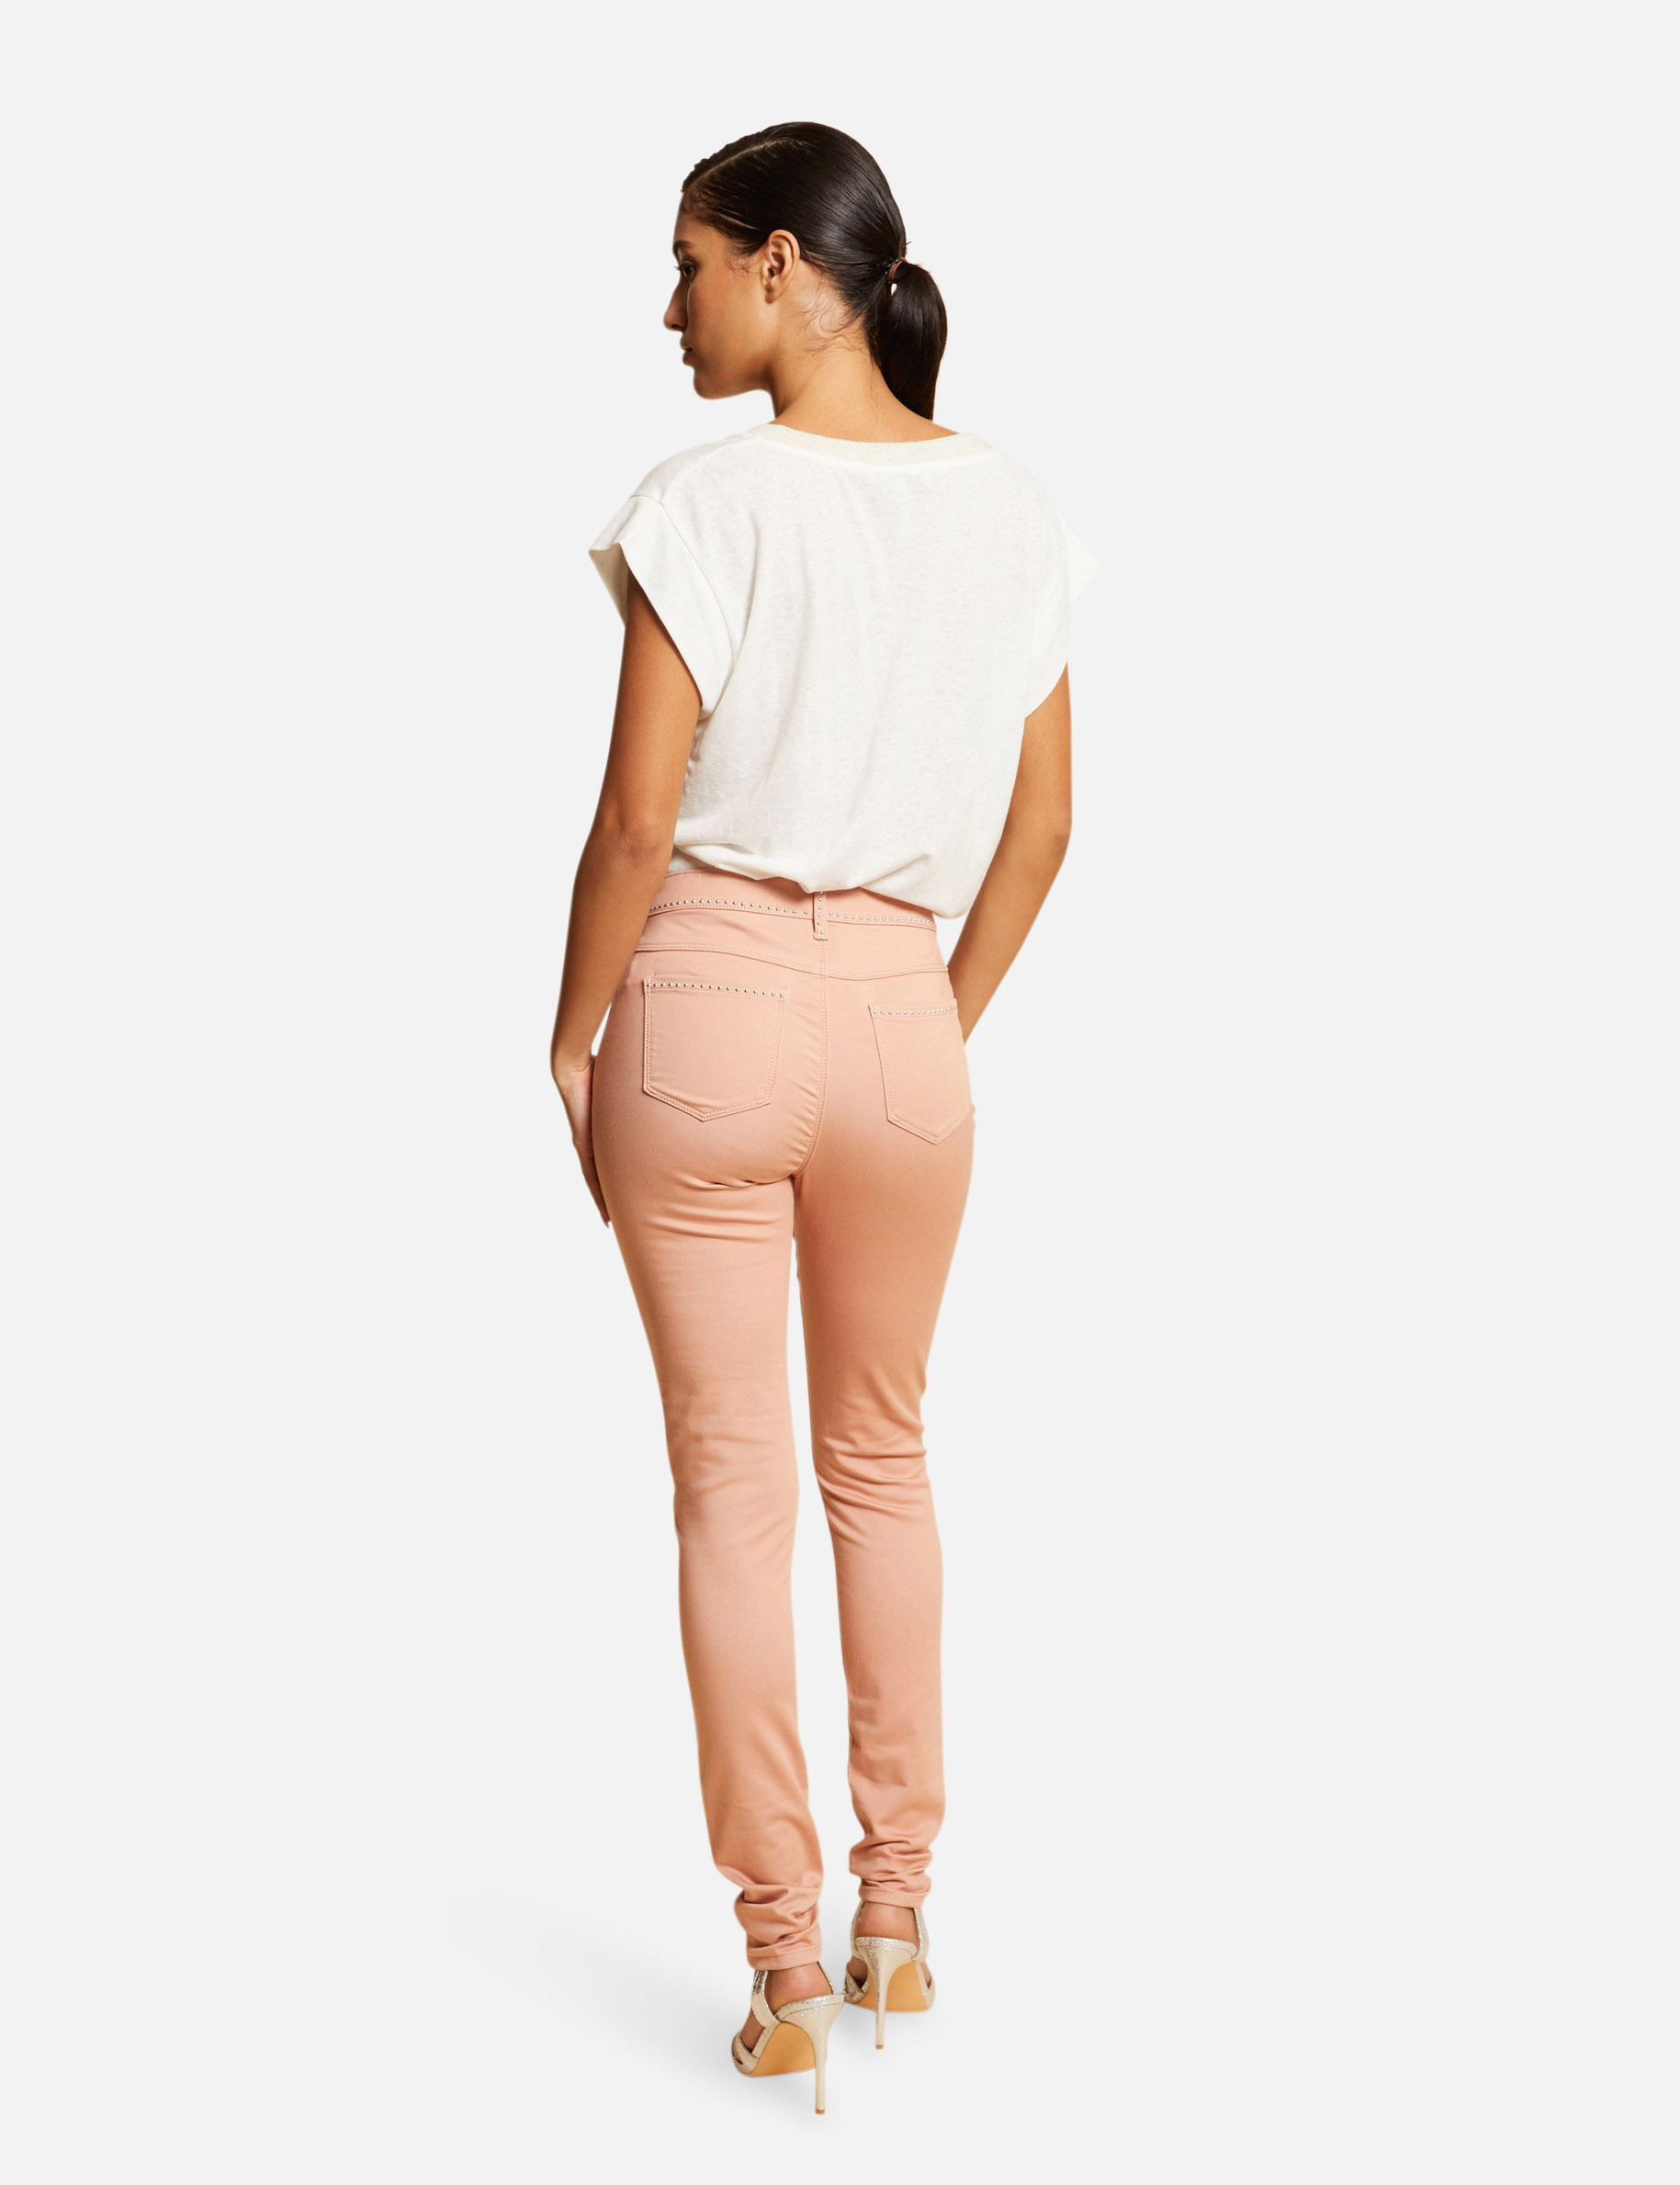 Slim trousers with studs antique pink ladies'